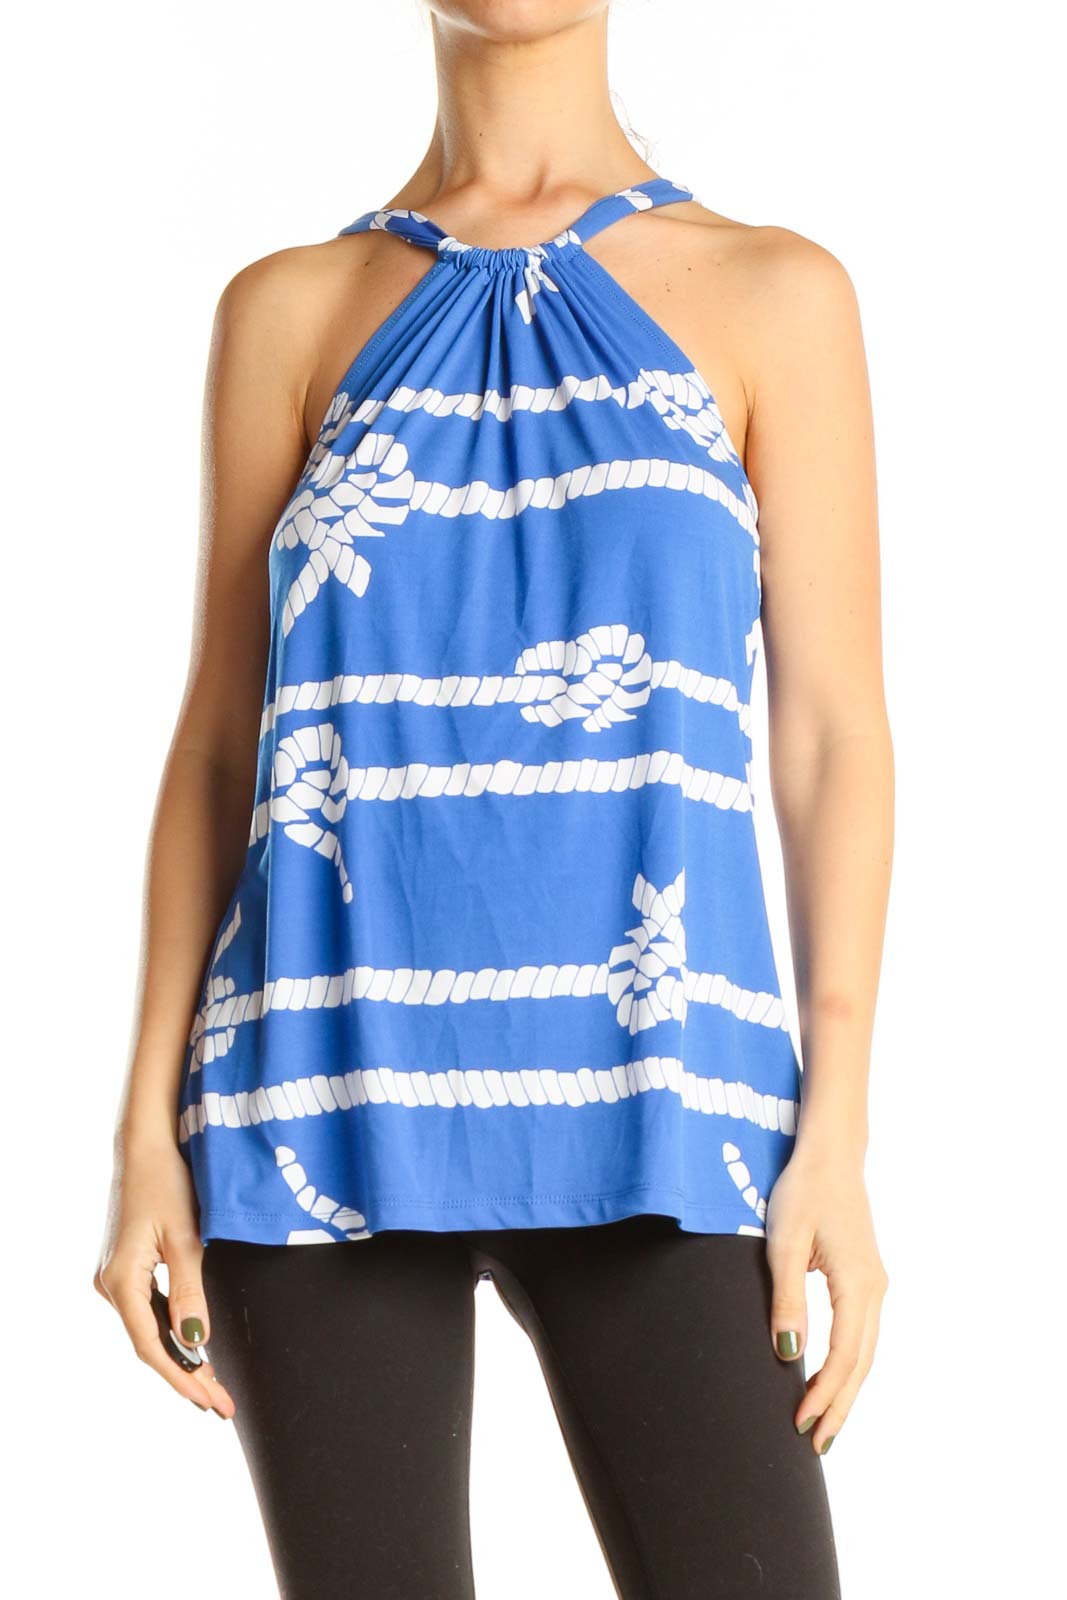 Blue Graphic Print Holiday Halter Top Front